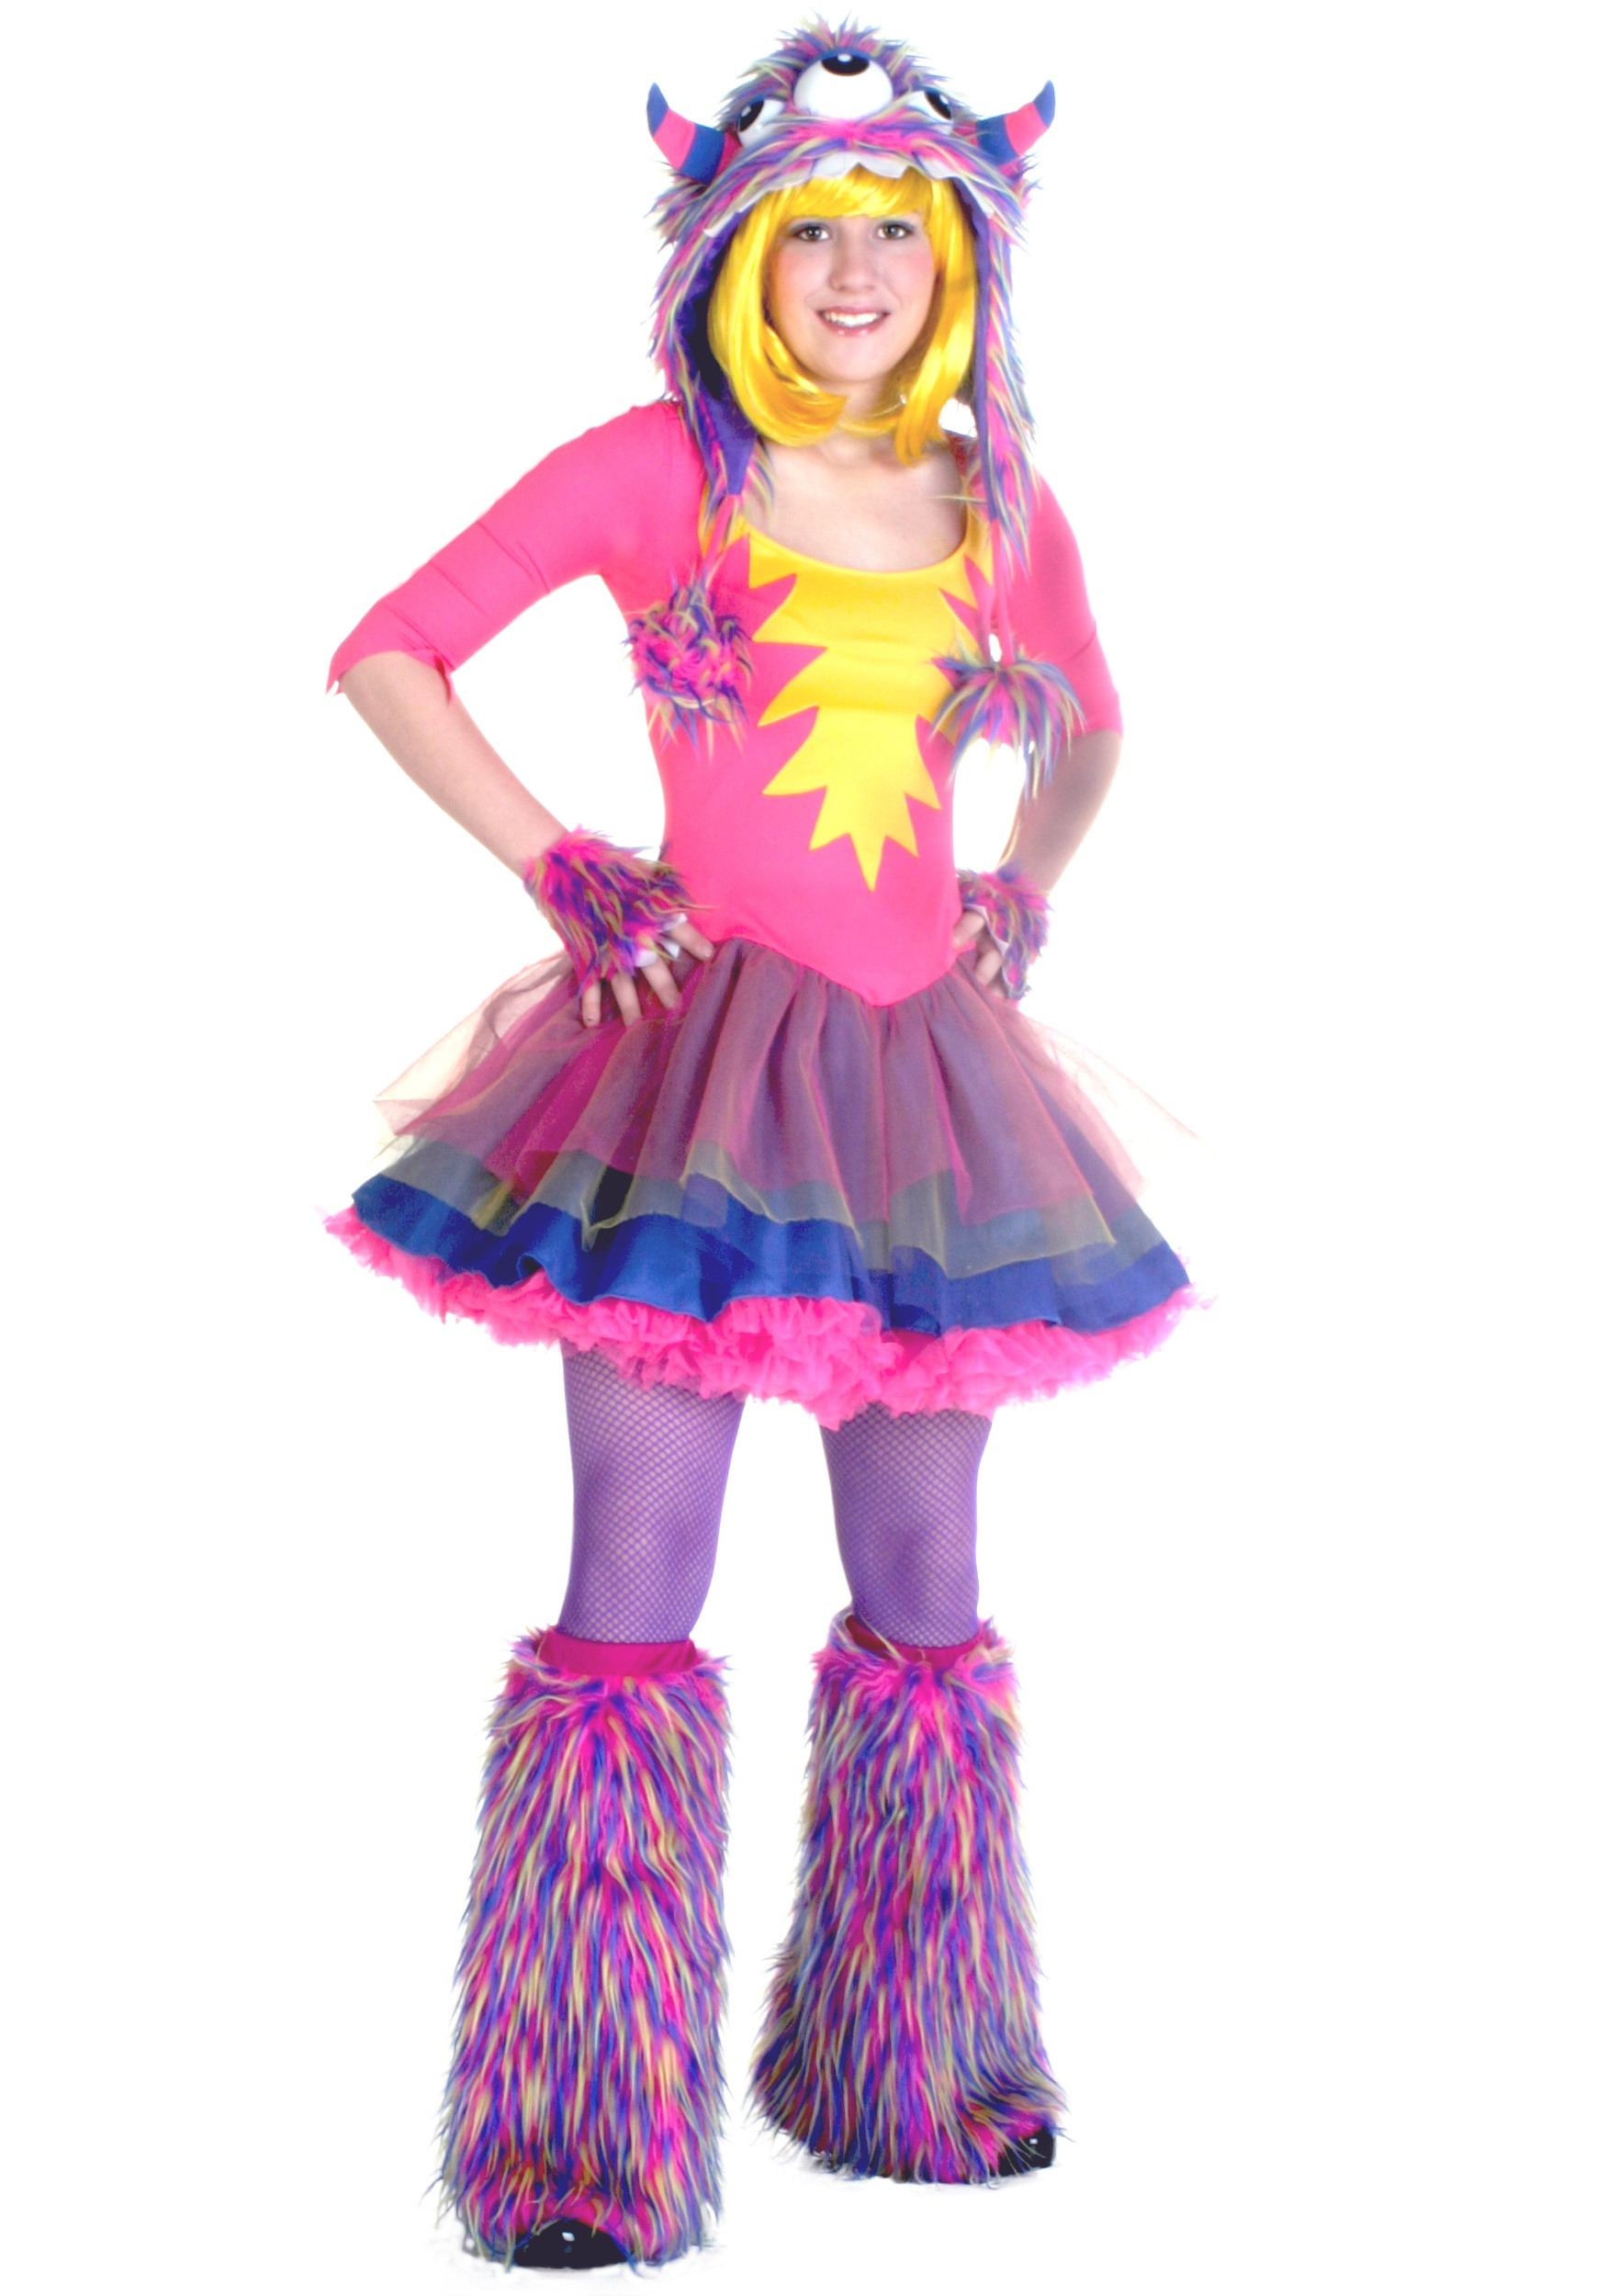 Halloween Party Ideas For Girls
 Teen Party Monster Costume